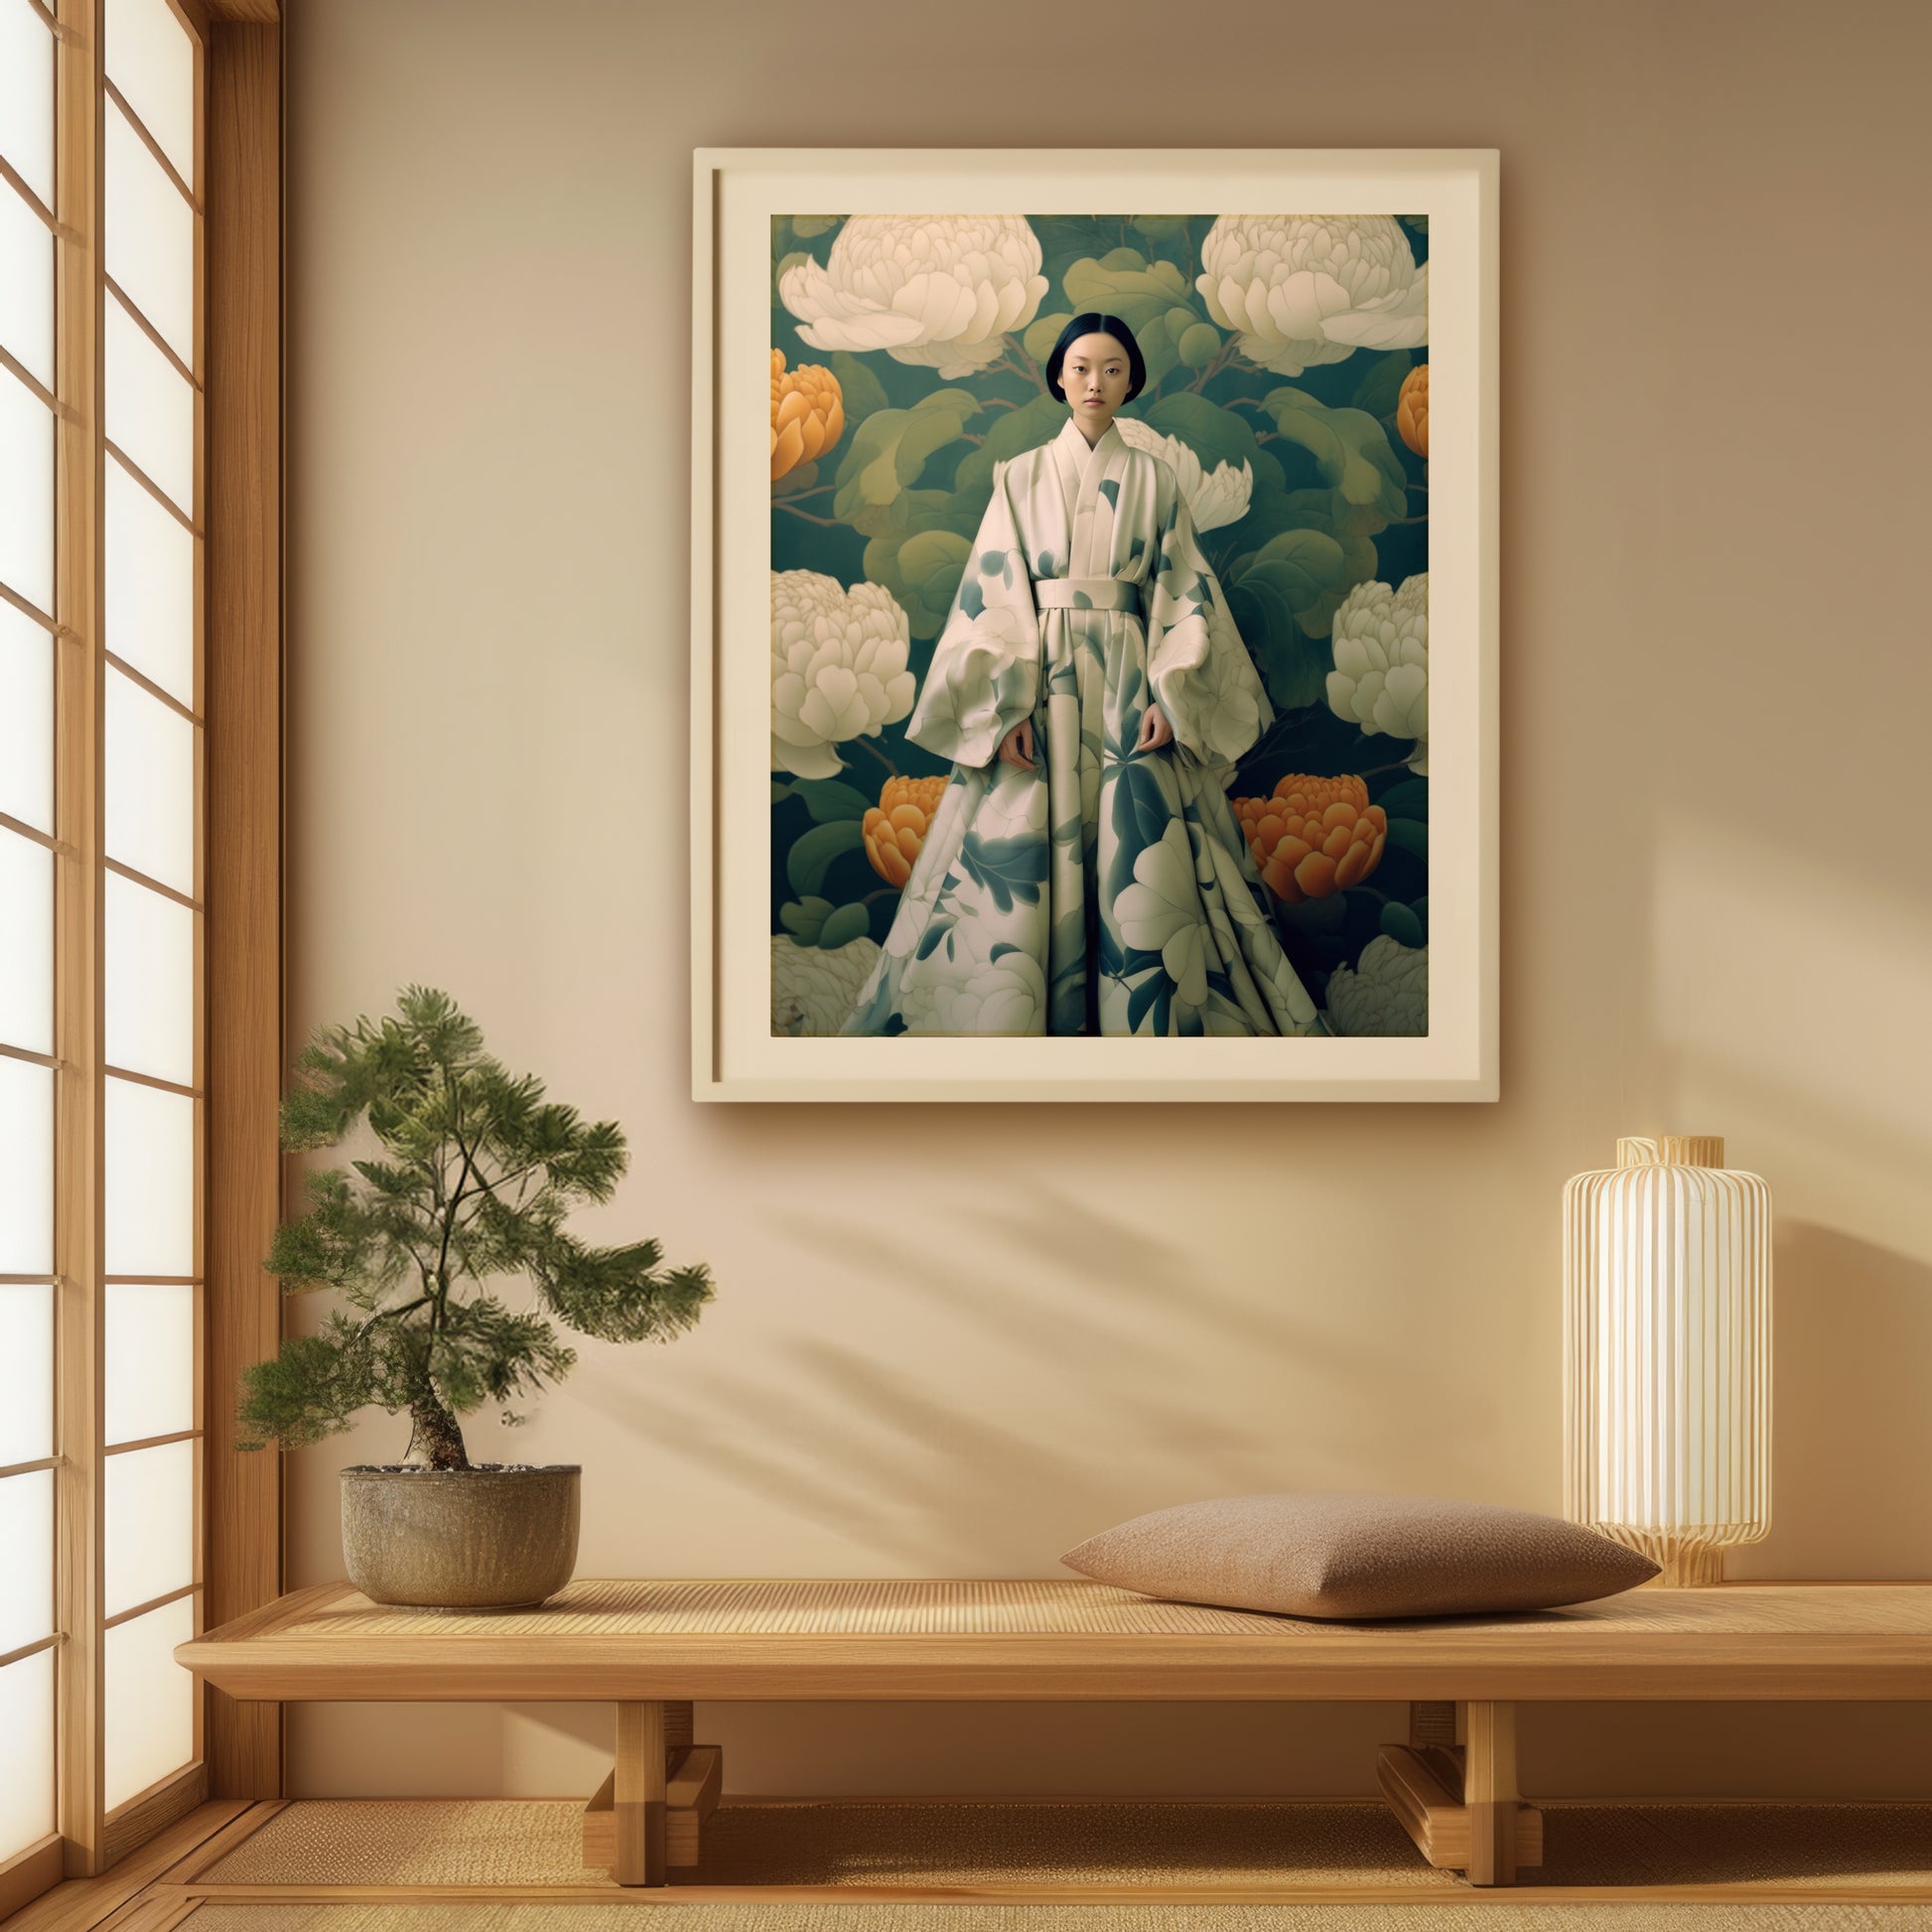 Art print showcasing a woman in an elegant kimono with floral patterns, standing against a backdrop of large, colorful flowers. This fine art print captures a timeless, elegant scene.